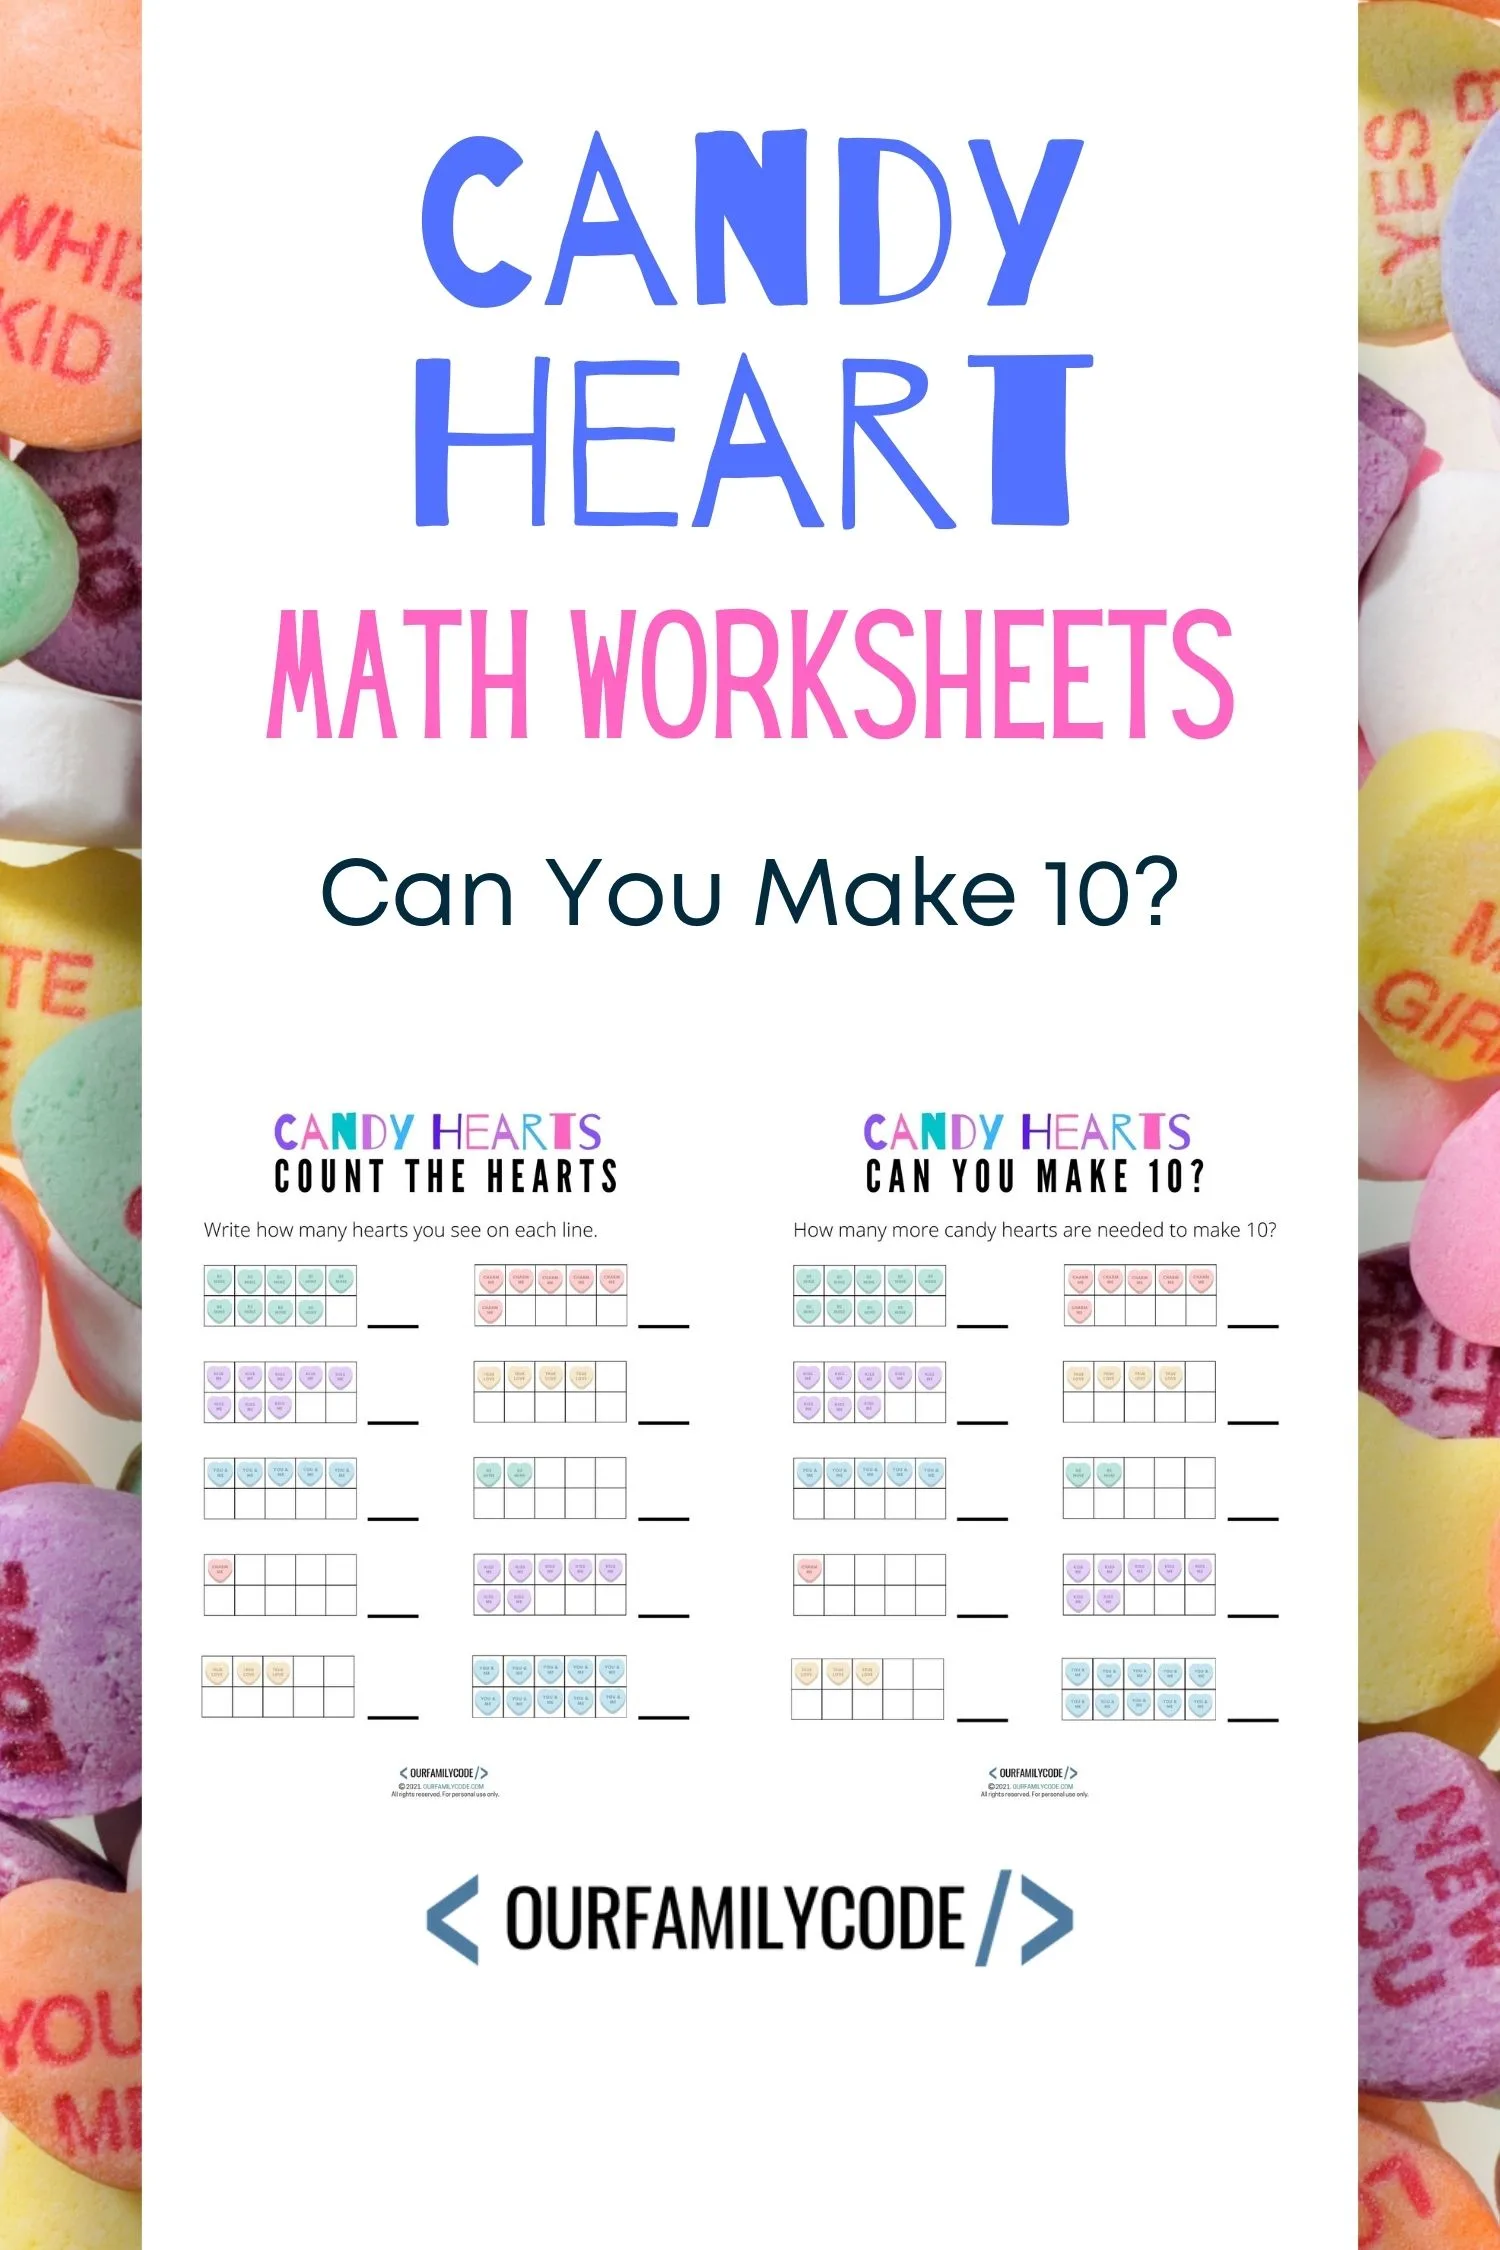 A picture of candy heart math worksheets.